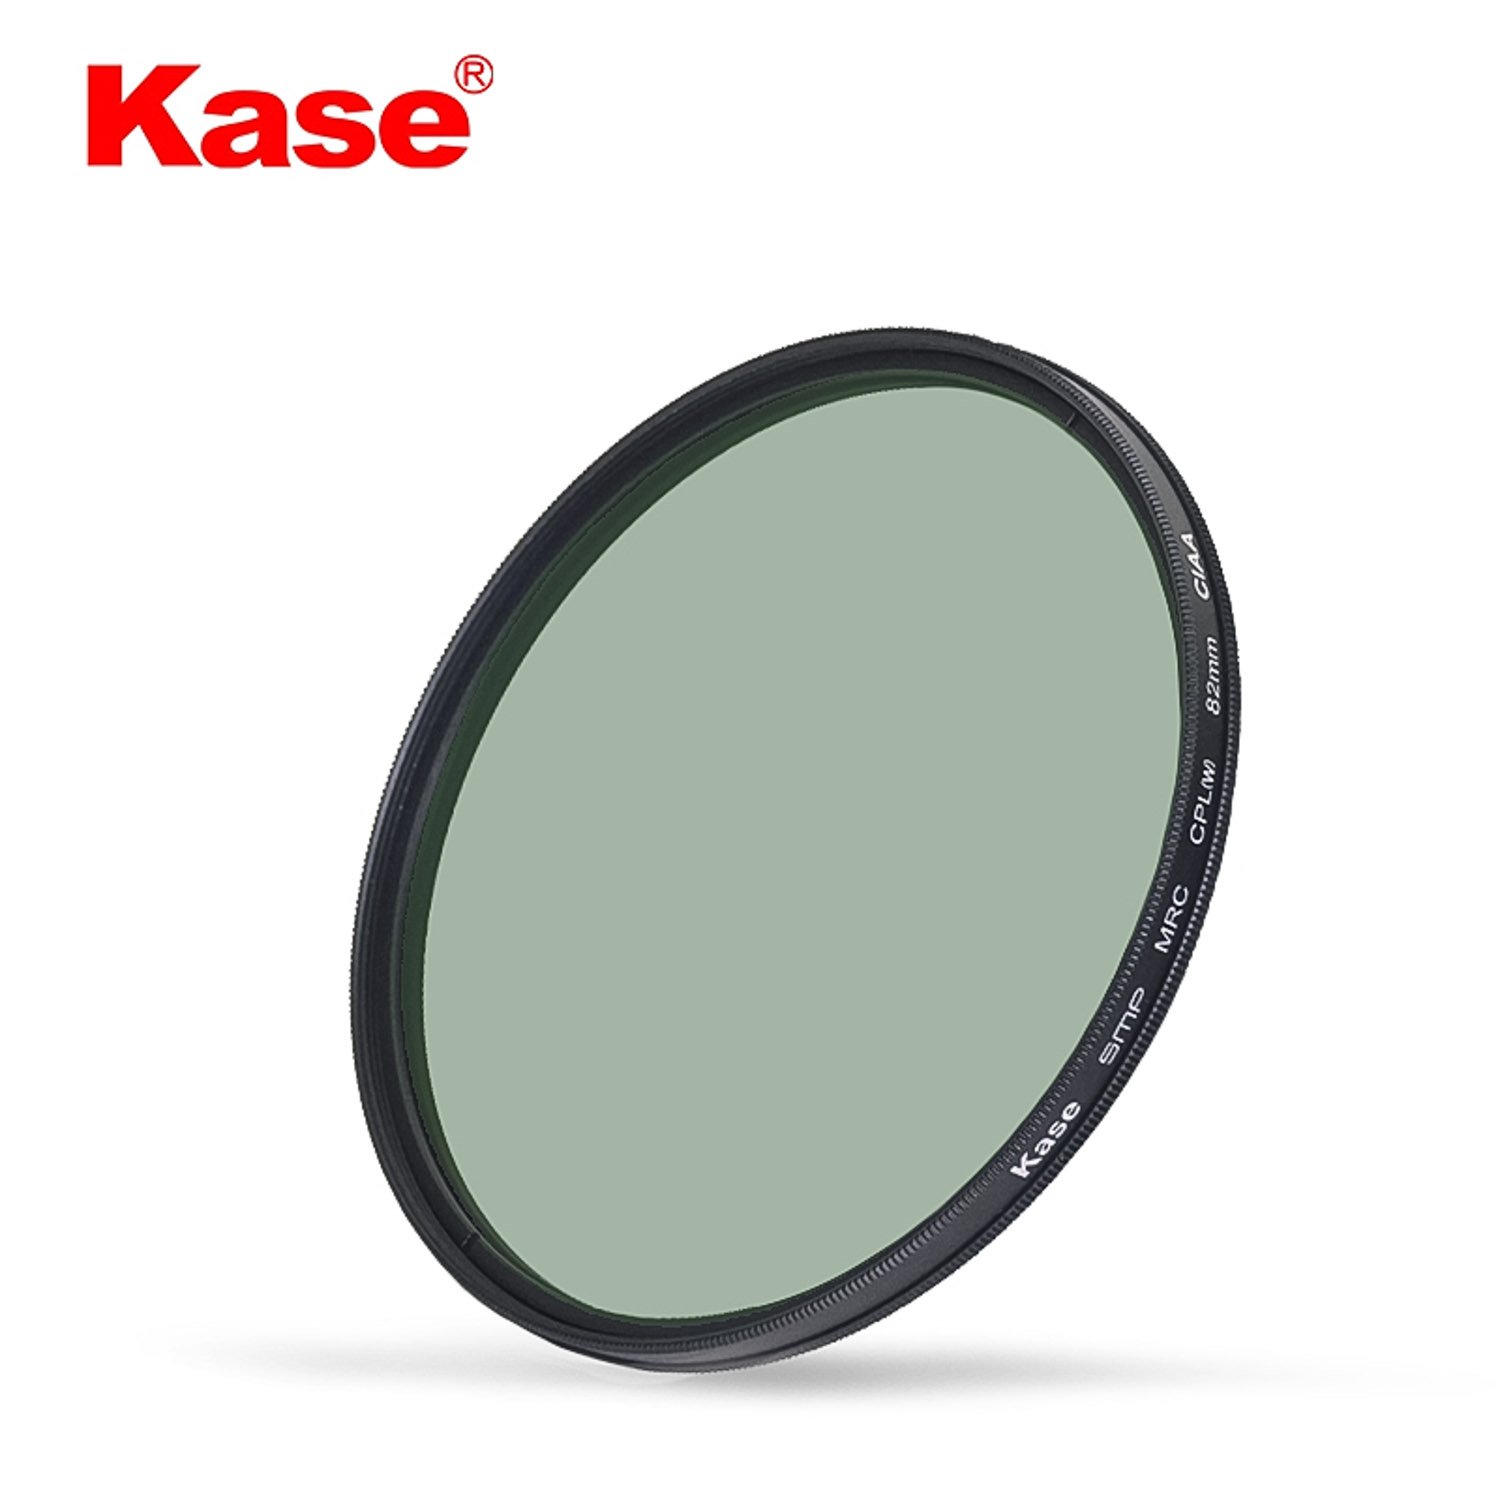 Kase Wolverine 43mm to 58mm Magnetic Step Up Filter Ring Adapter 43 58